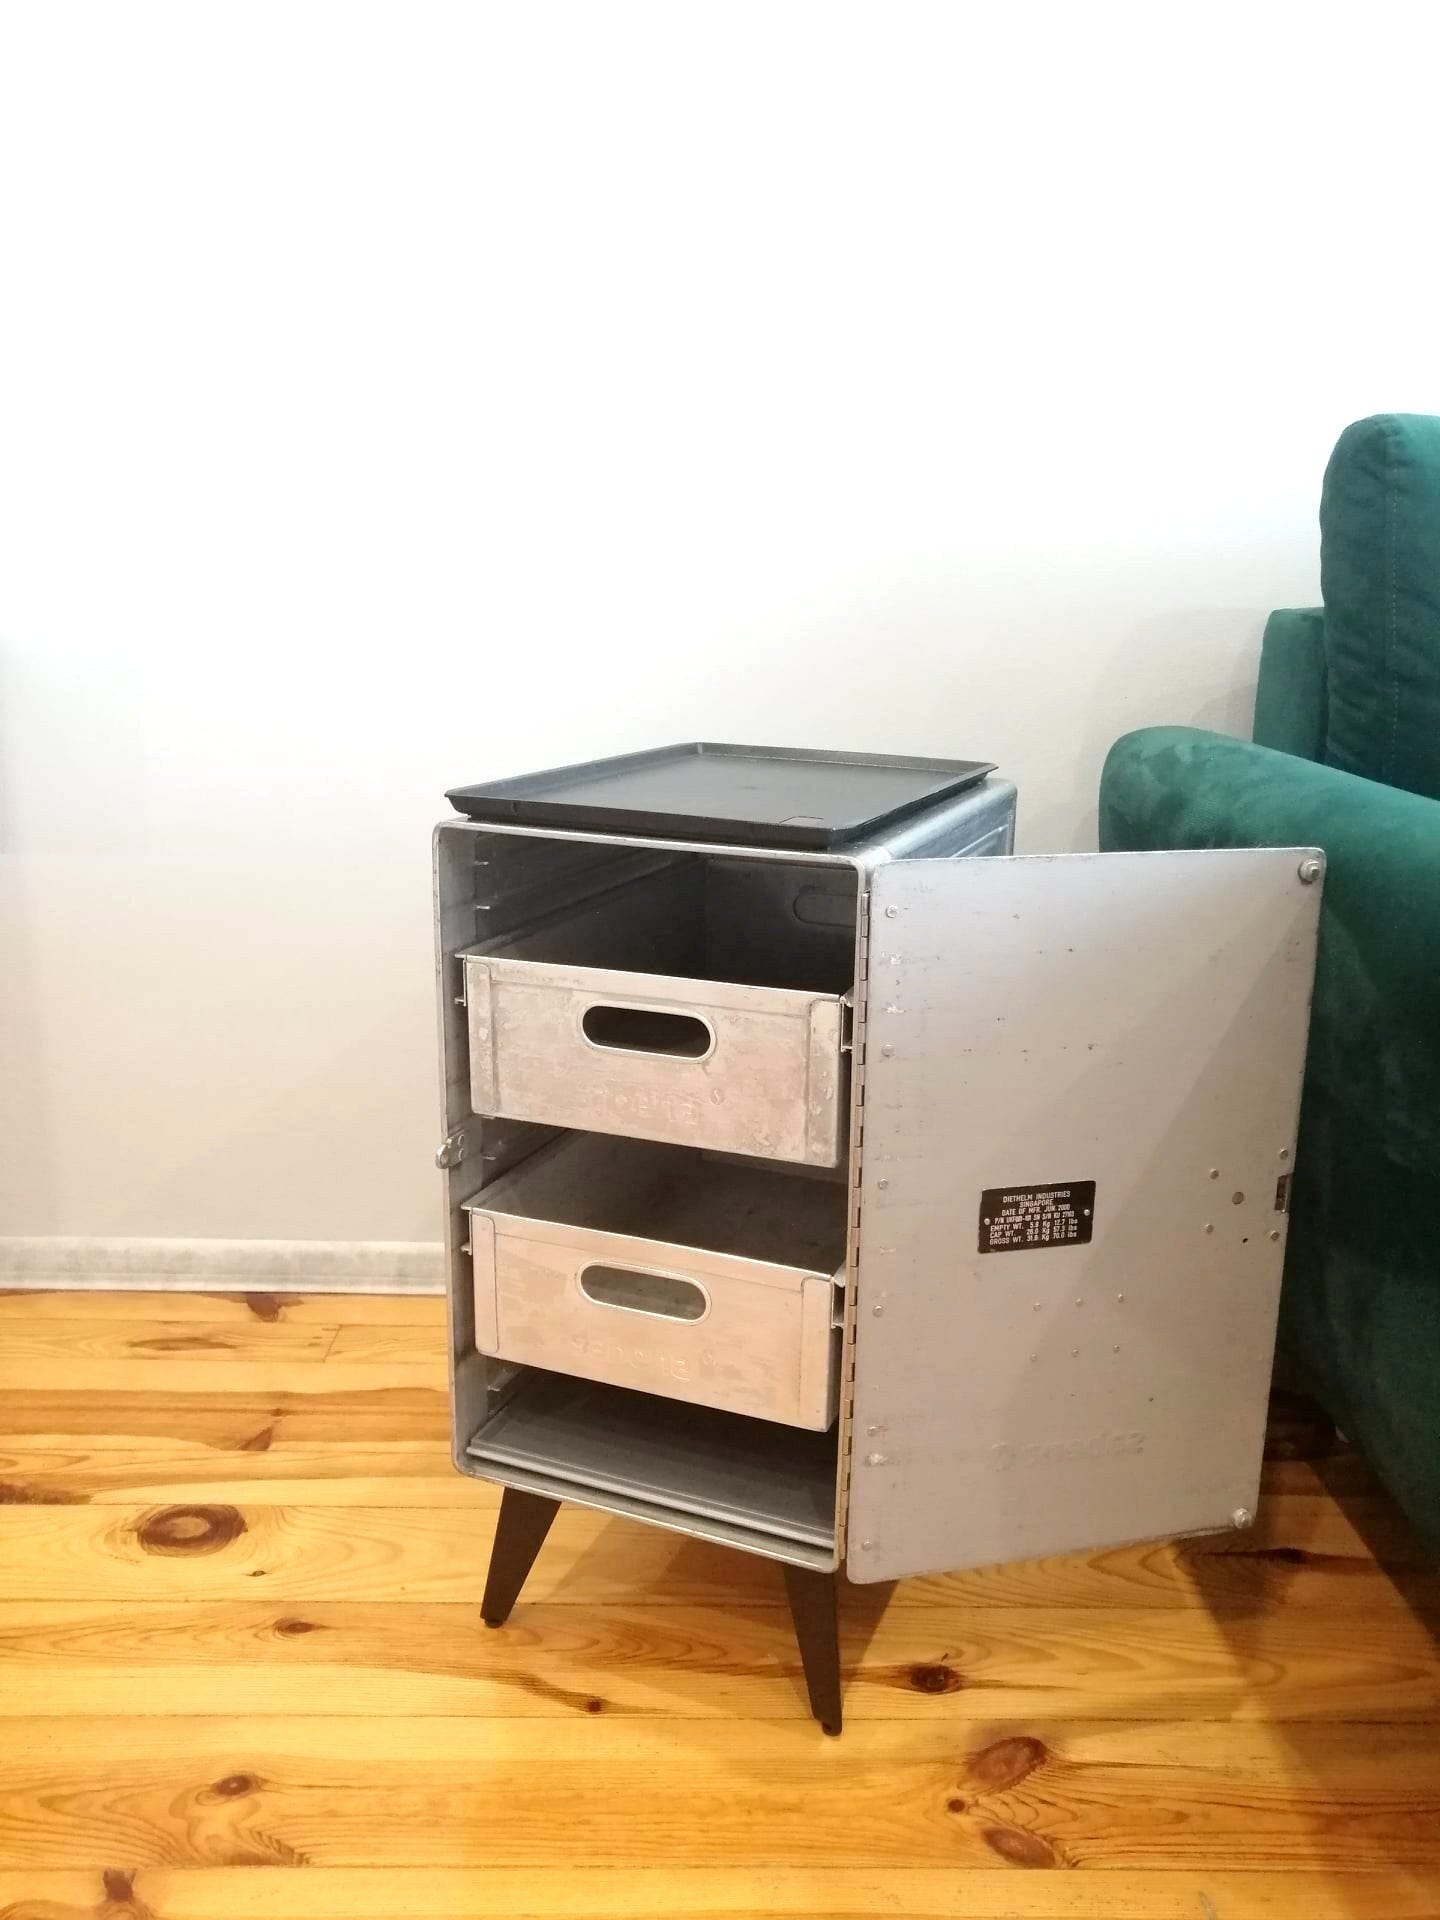 Aviation Cabinet, Sabena / Brussels Airlines Airline Galley Storage Container as a Nightstand, Side Table, Storage Cabinet